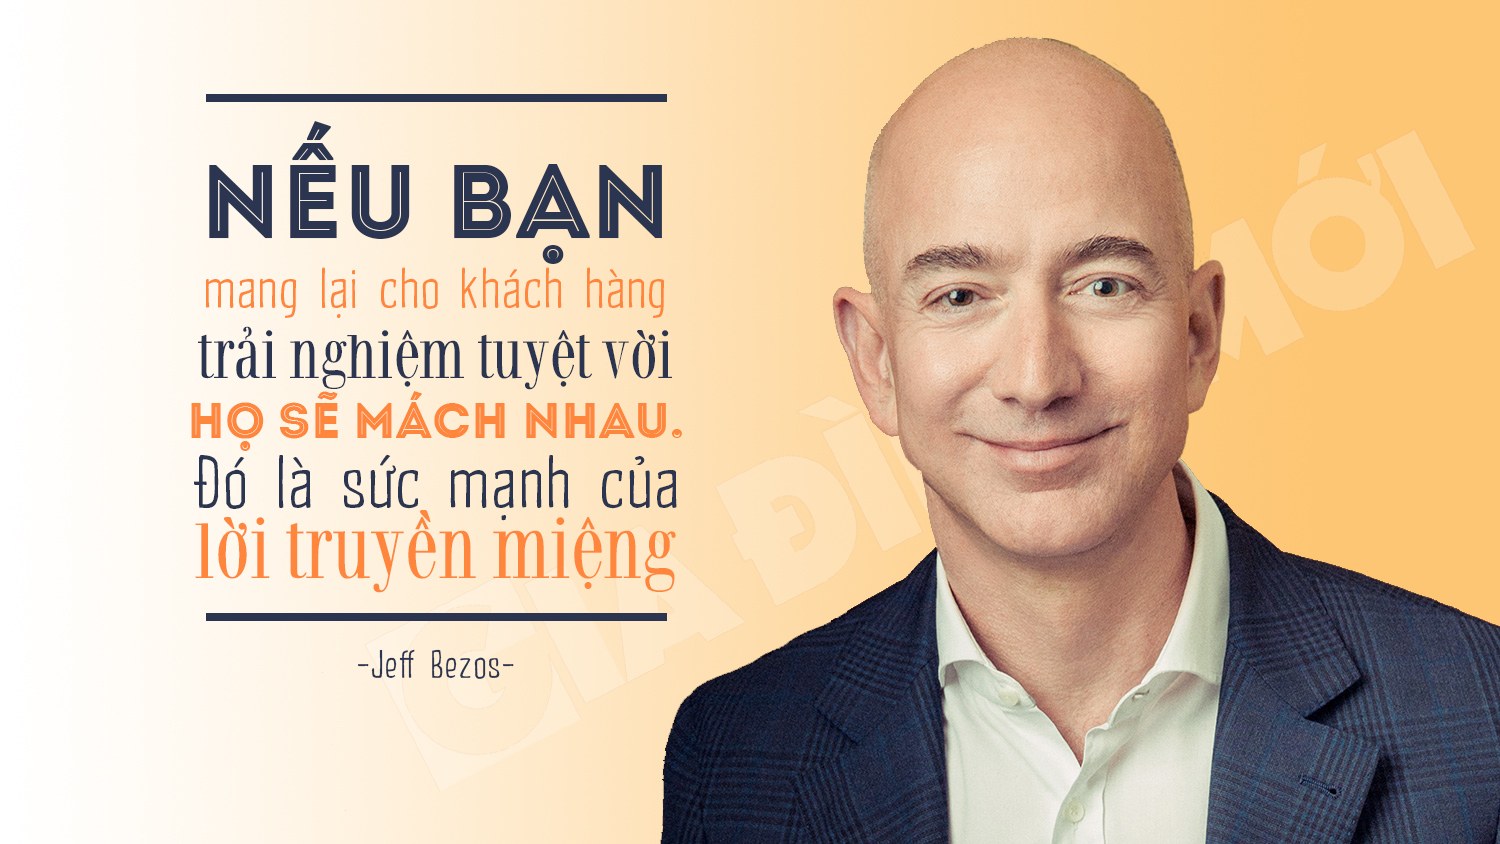 triet ly thanh cong jeff bezos 2